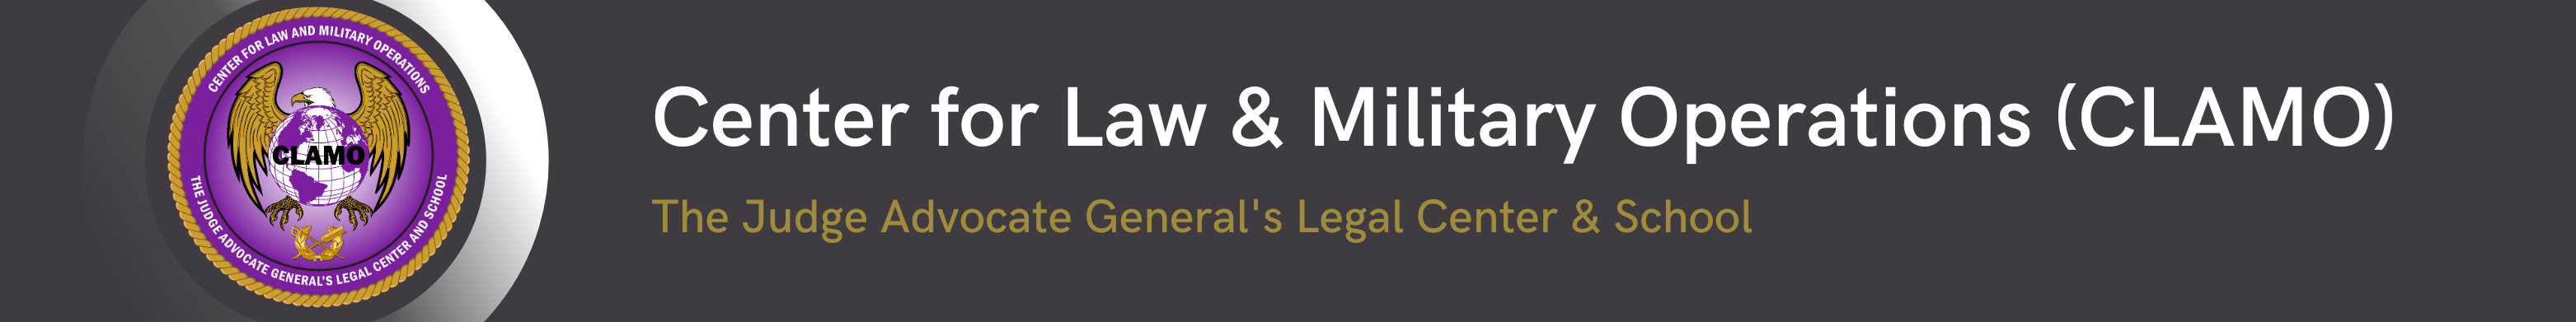 Center for Law and Military Operations Banner